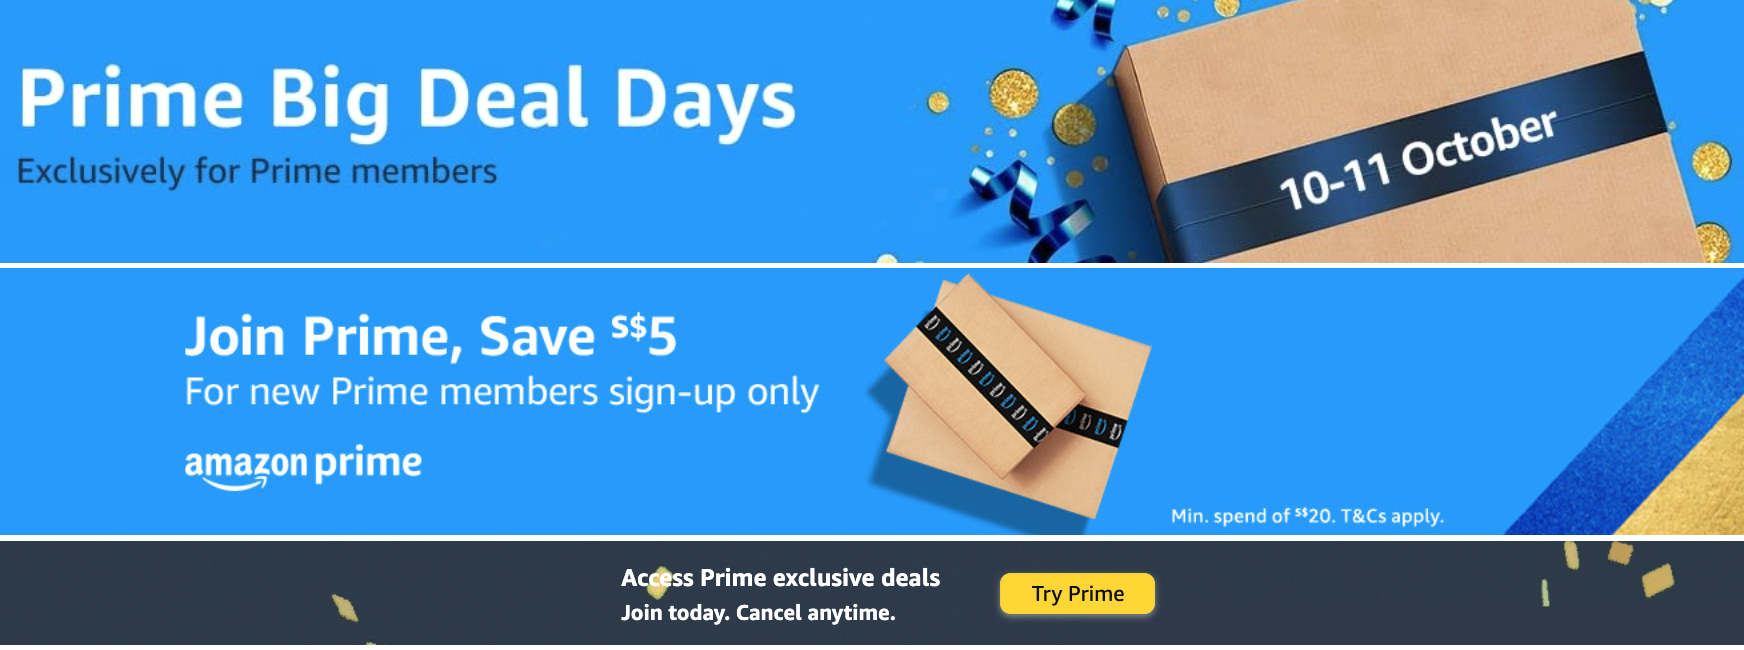 https://techlingo.co/wp-content/uploads/2023/10/Amazon-First-ever-Prime-Big-Deal-Days-Cover-Image.png